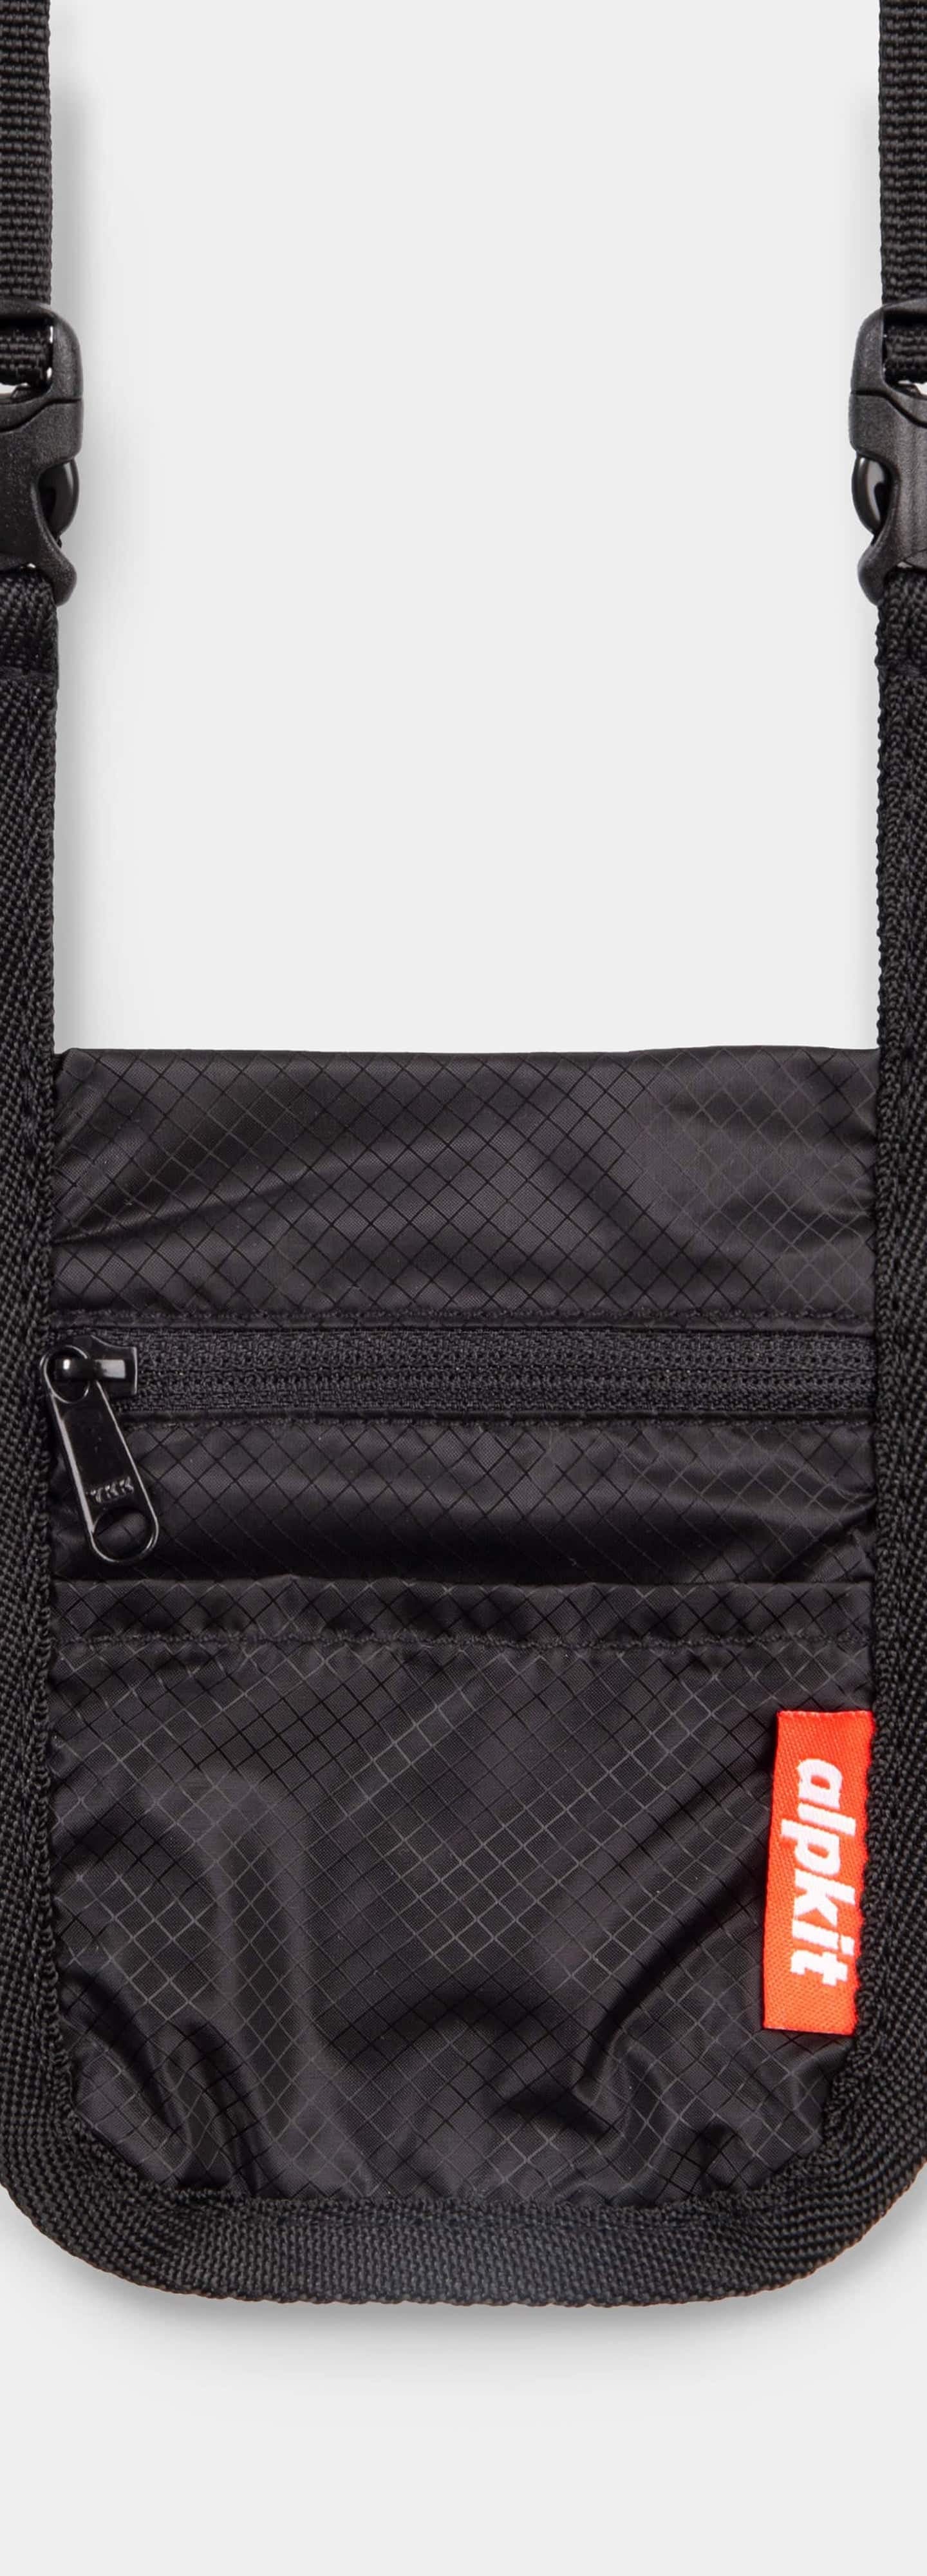 Orbiter Small | Lanyard Travel Pouch